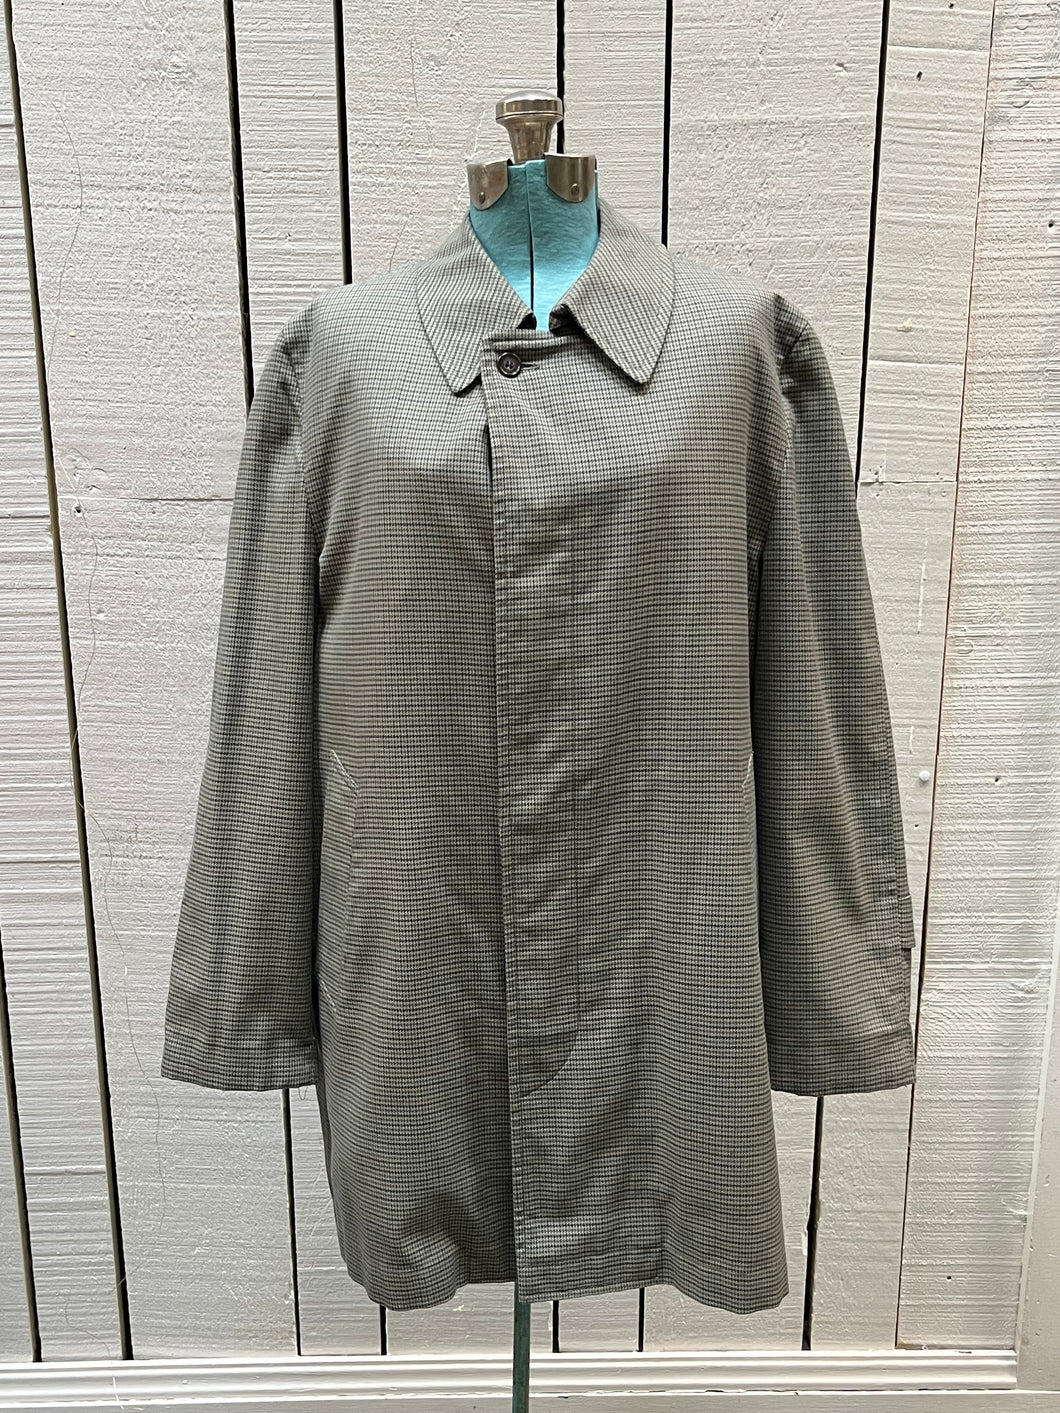 Vintage London Fog grey houndstooth maincoat with a 50% polyester/ 50% cotton shell, removable 100% acrylic pile lining, zipper closure and two front pockets.

Made in USA
Size 38 Short